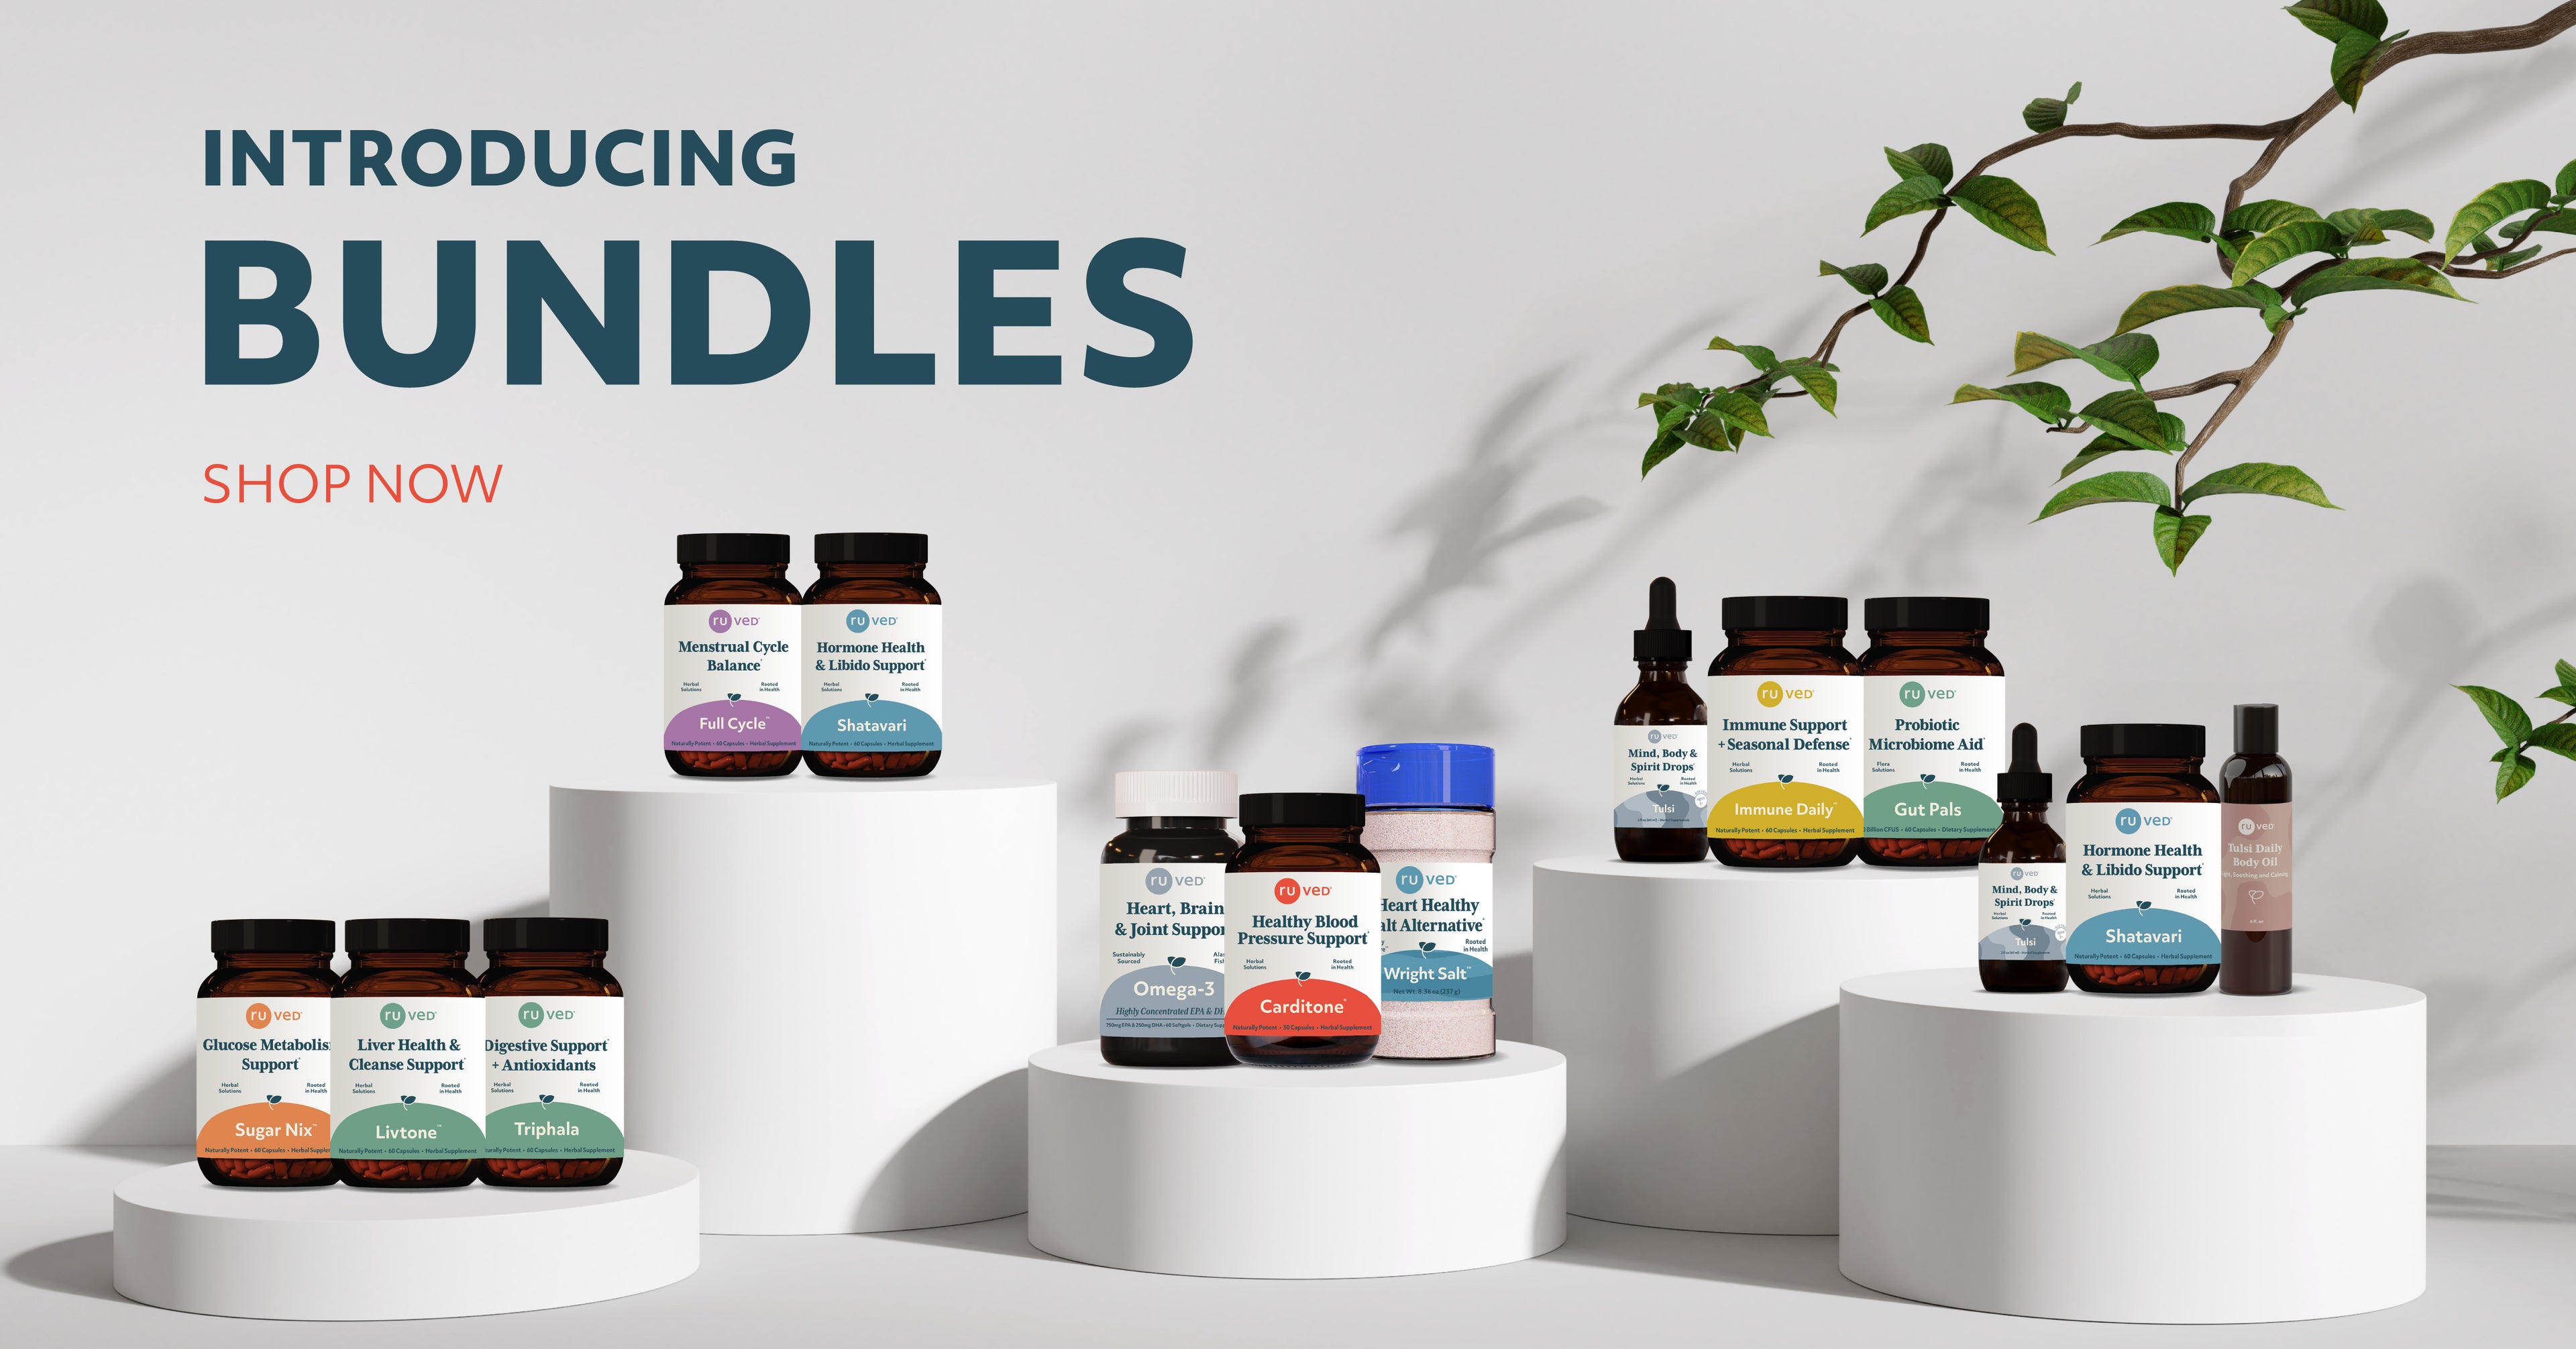 Introducing Bundles. Shop now to learn more about 14 exclusive bundles, designed and catered towards your body's unique needs. 